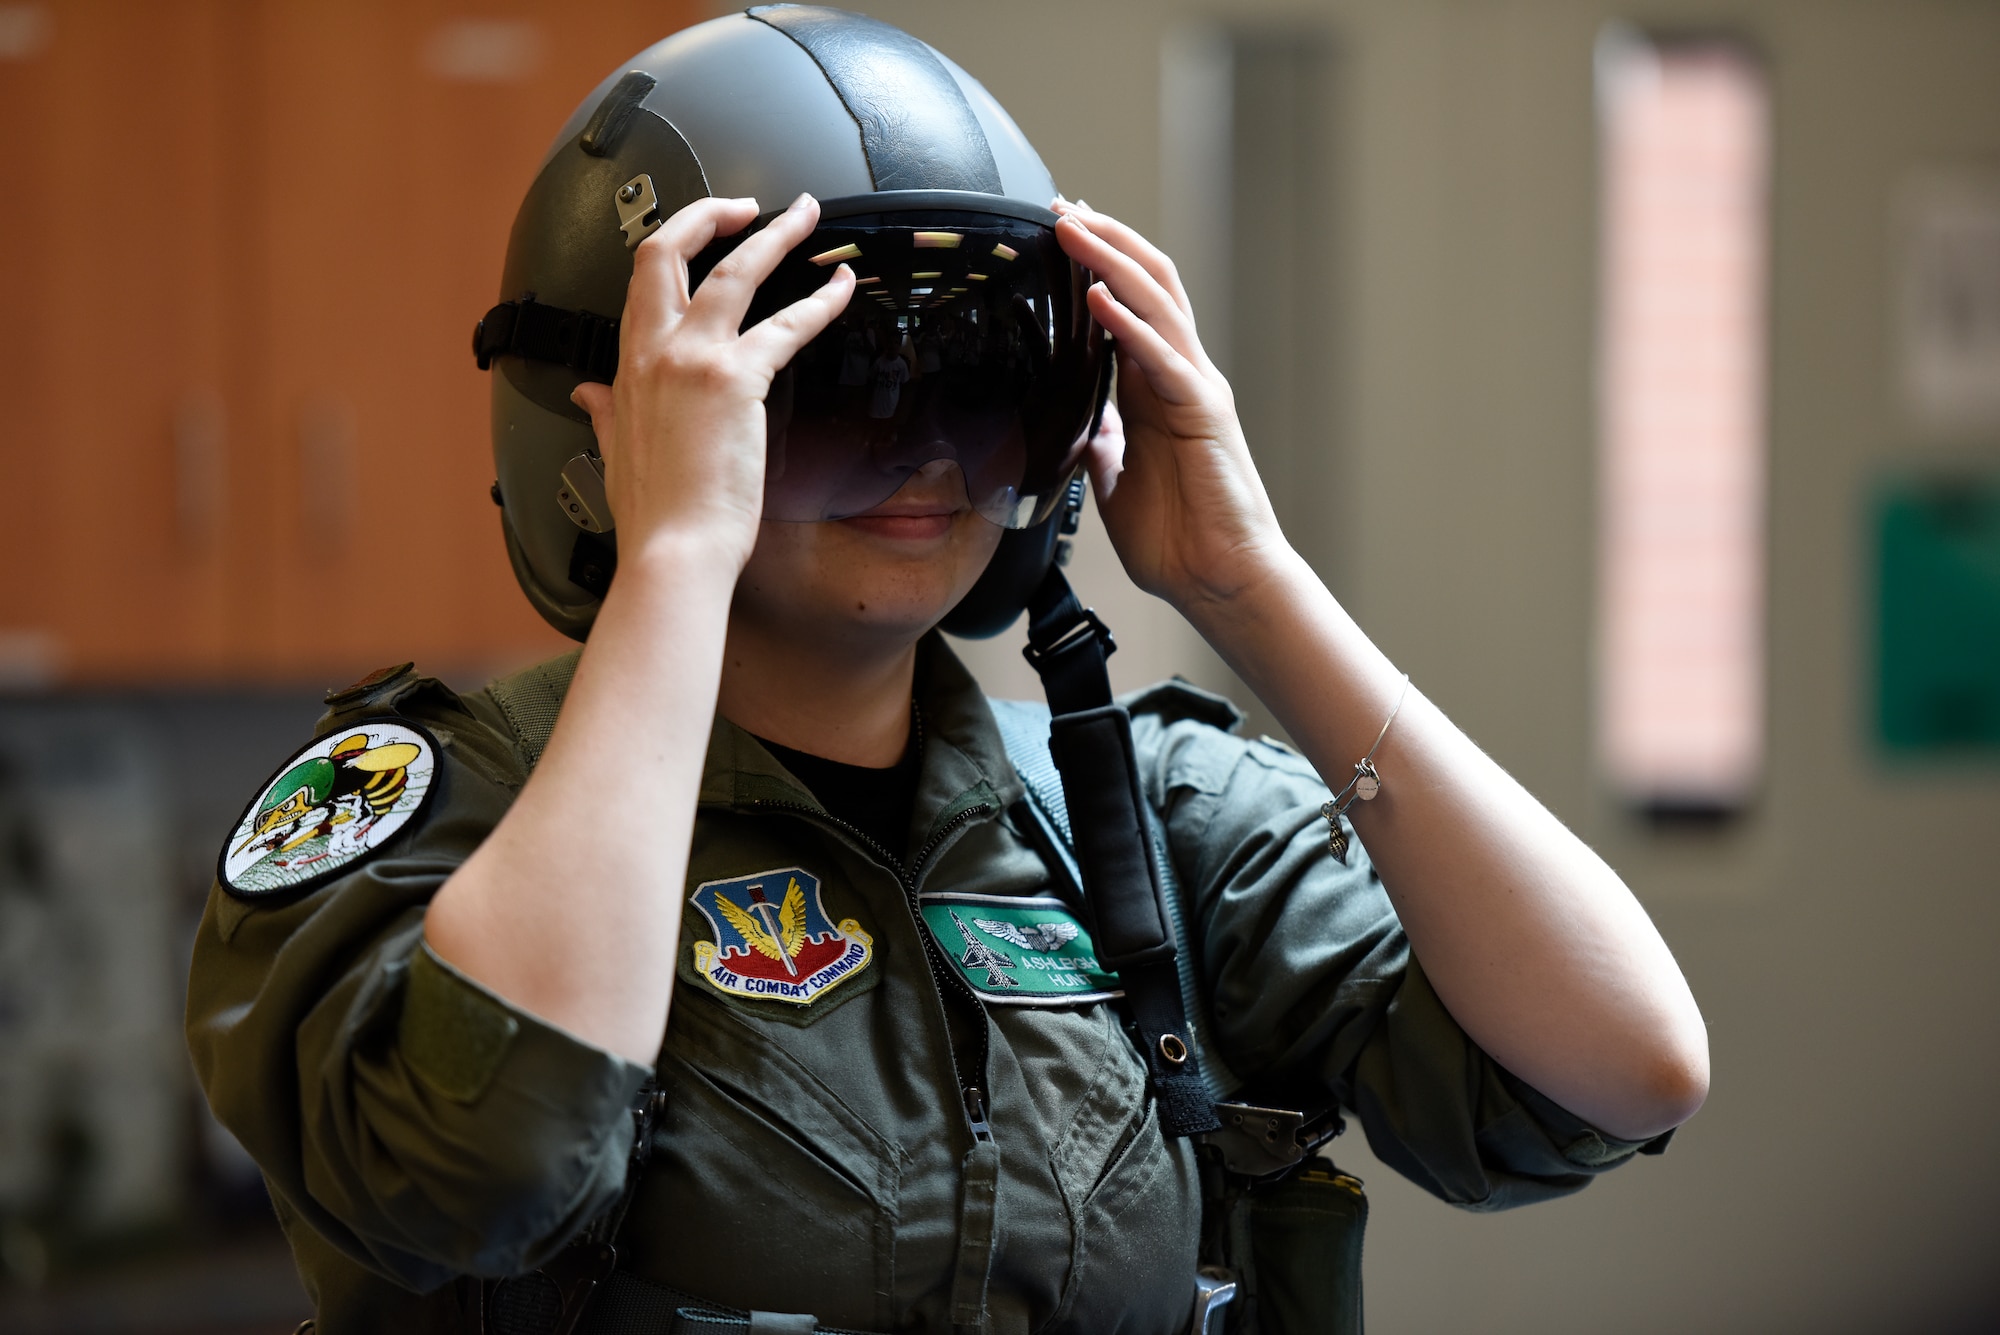 Honorary 2nd Lt. Ashleigh Hunt tries on a pilot’s helmet May 26, 2016 during Pilot for a Day at the 180th Fighter Wing in Swanton, Ohio. Pilot for a Day, a program supporting children and young adults who live with chronic or life-threatening illnesses, allows the 180FW to give back to the local community, whose enduring support for the Airmen makes the 180FW mission possible. (U.S. Air National Guard photo by Staff Sgt. Shane Hughes)